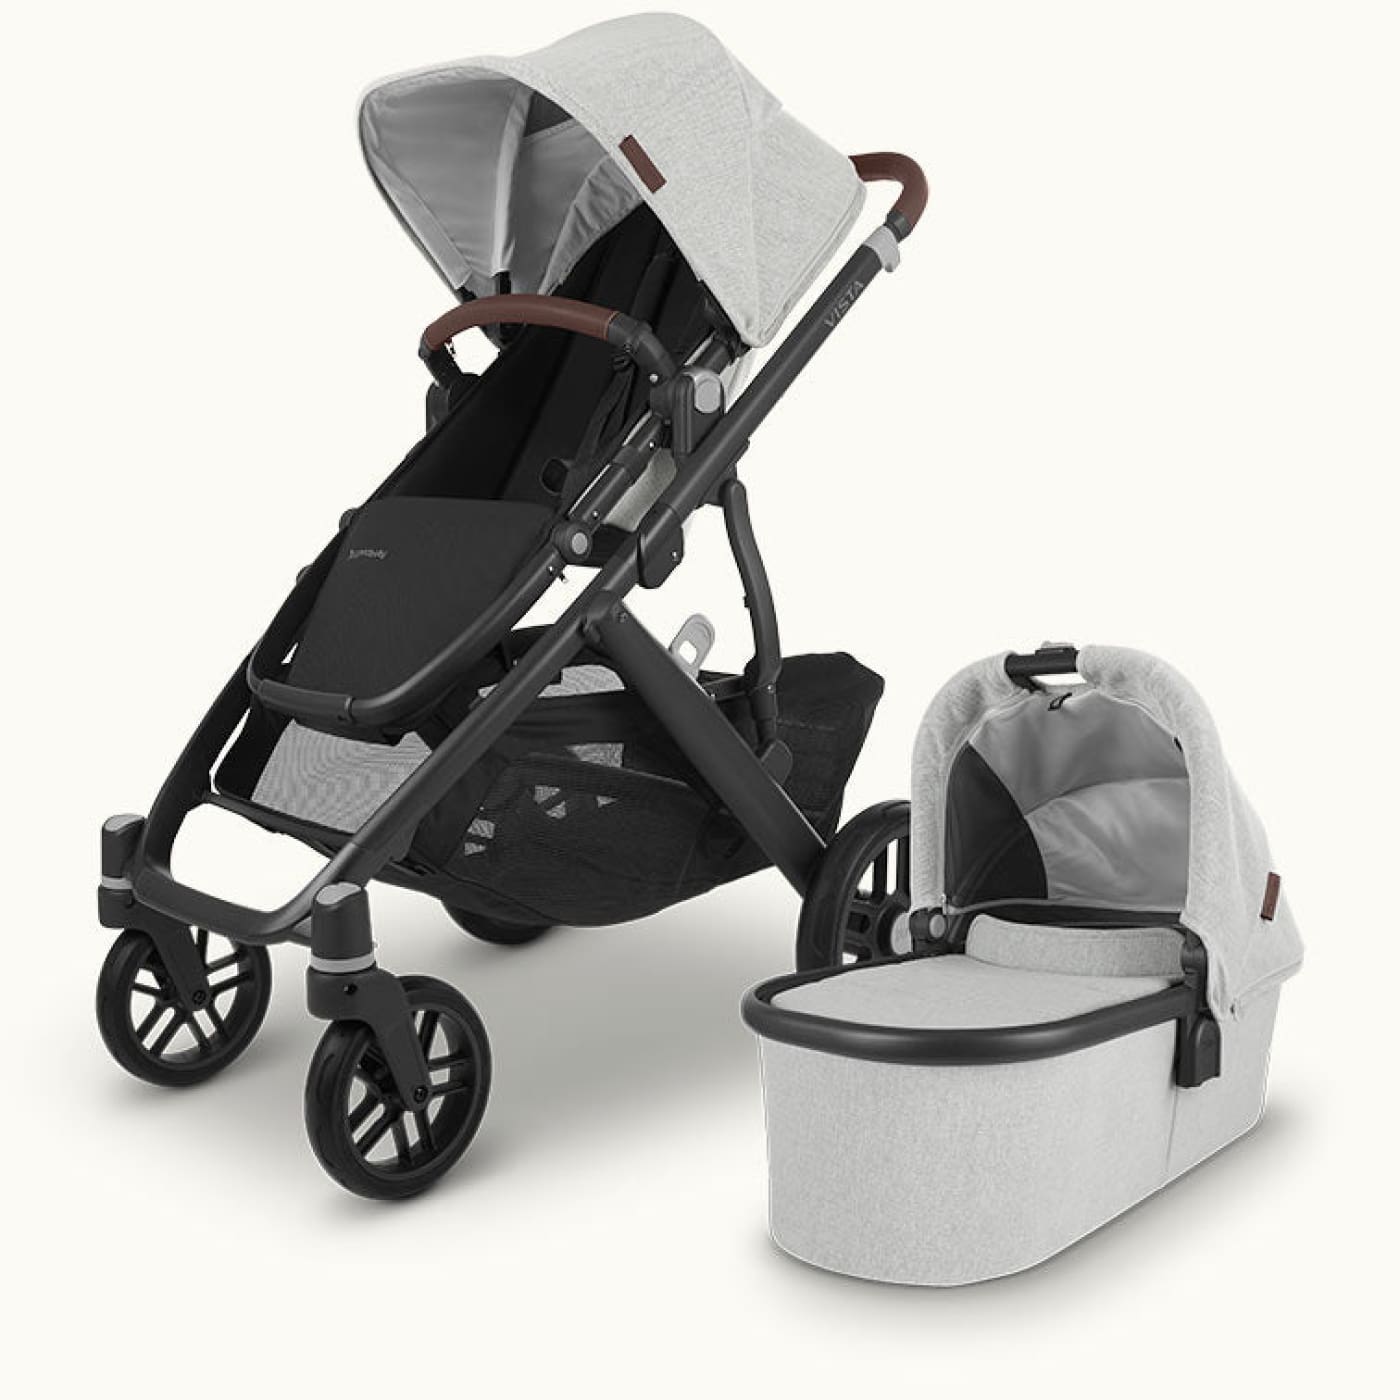 UPPAbaby Vista V2 Stroller with Bassinet and BONUS Upper Adaptors - Anthony (White & Grey Chenille/Carbon/Chestnut Leather Leather) -